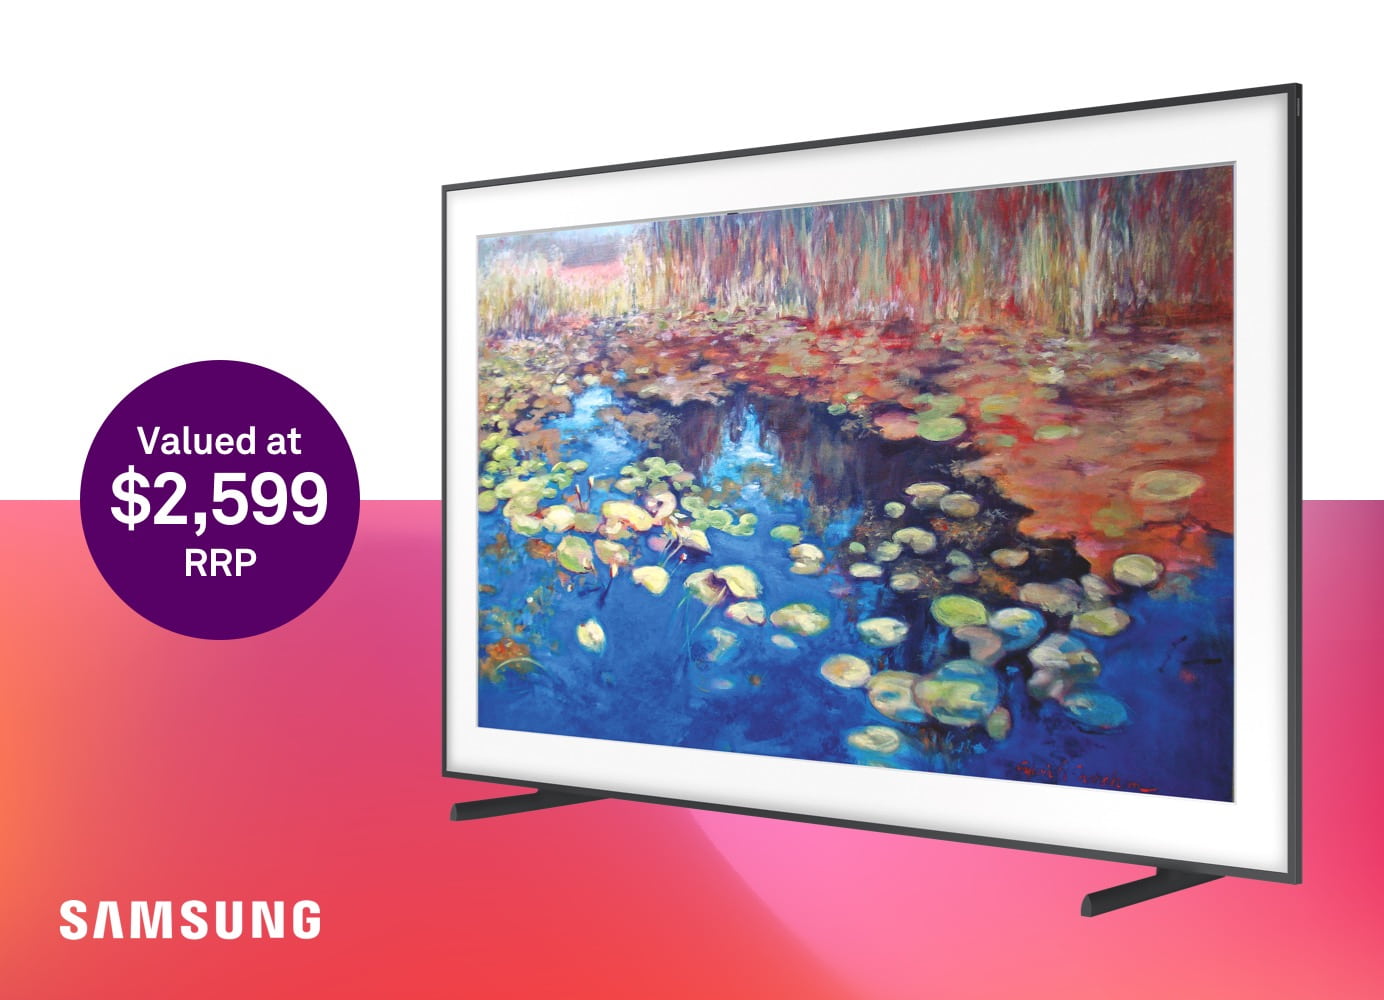 Win a Samsung 65" The Frame TV, valued at $2599 RRP when you sign up  for Samsung Galaxy news